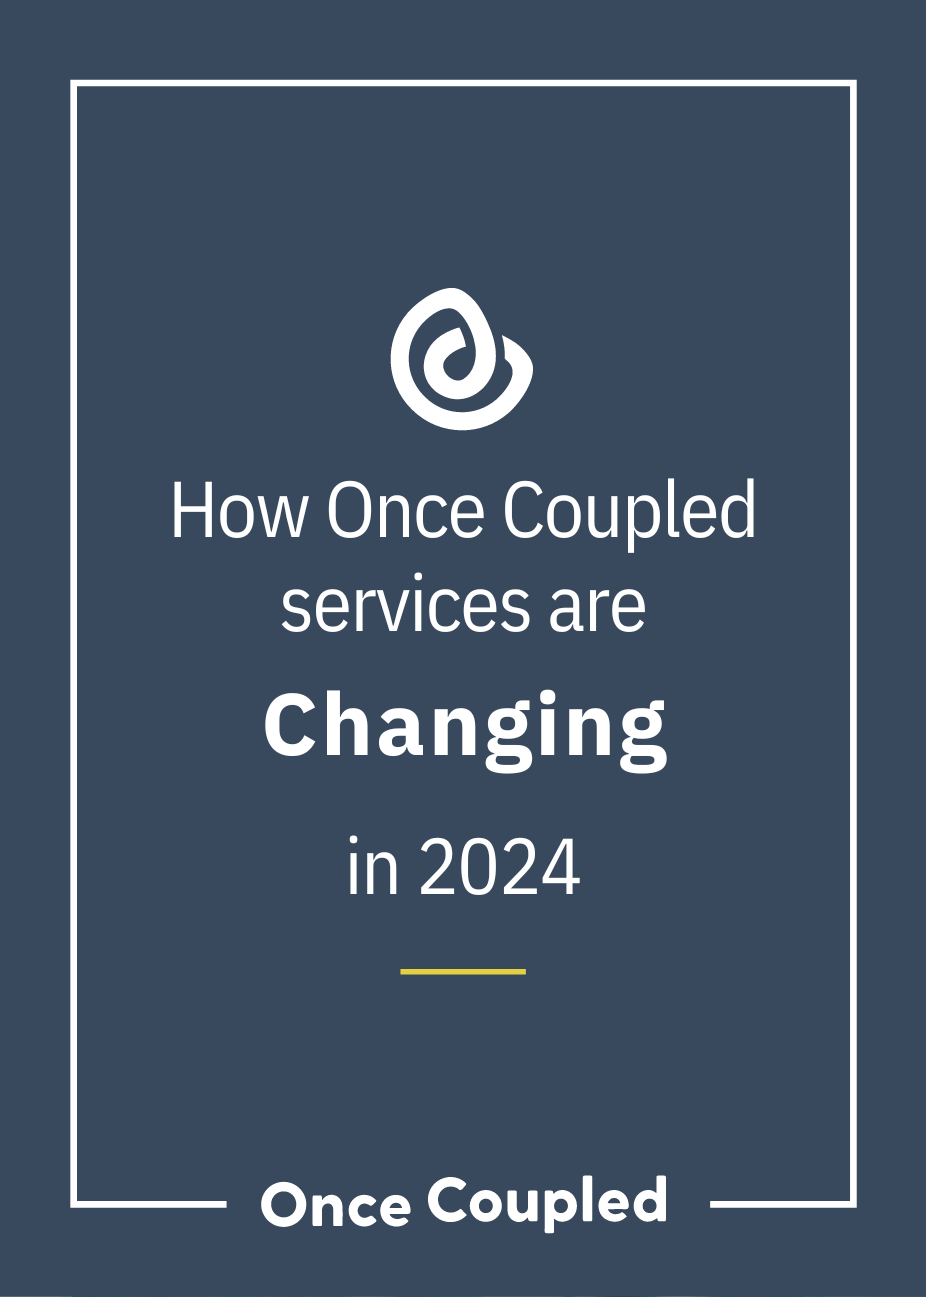 How Once Coupled services are changing in 2024